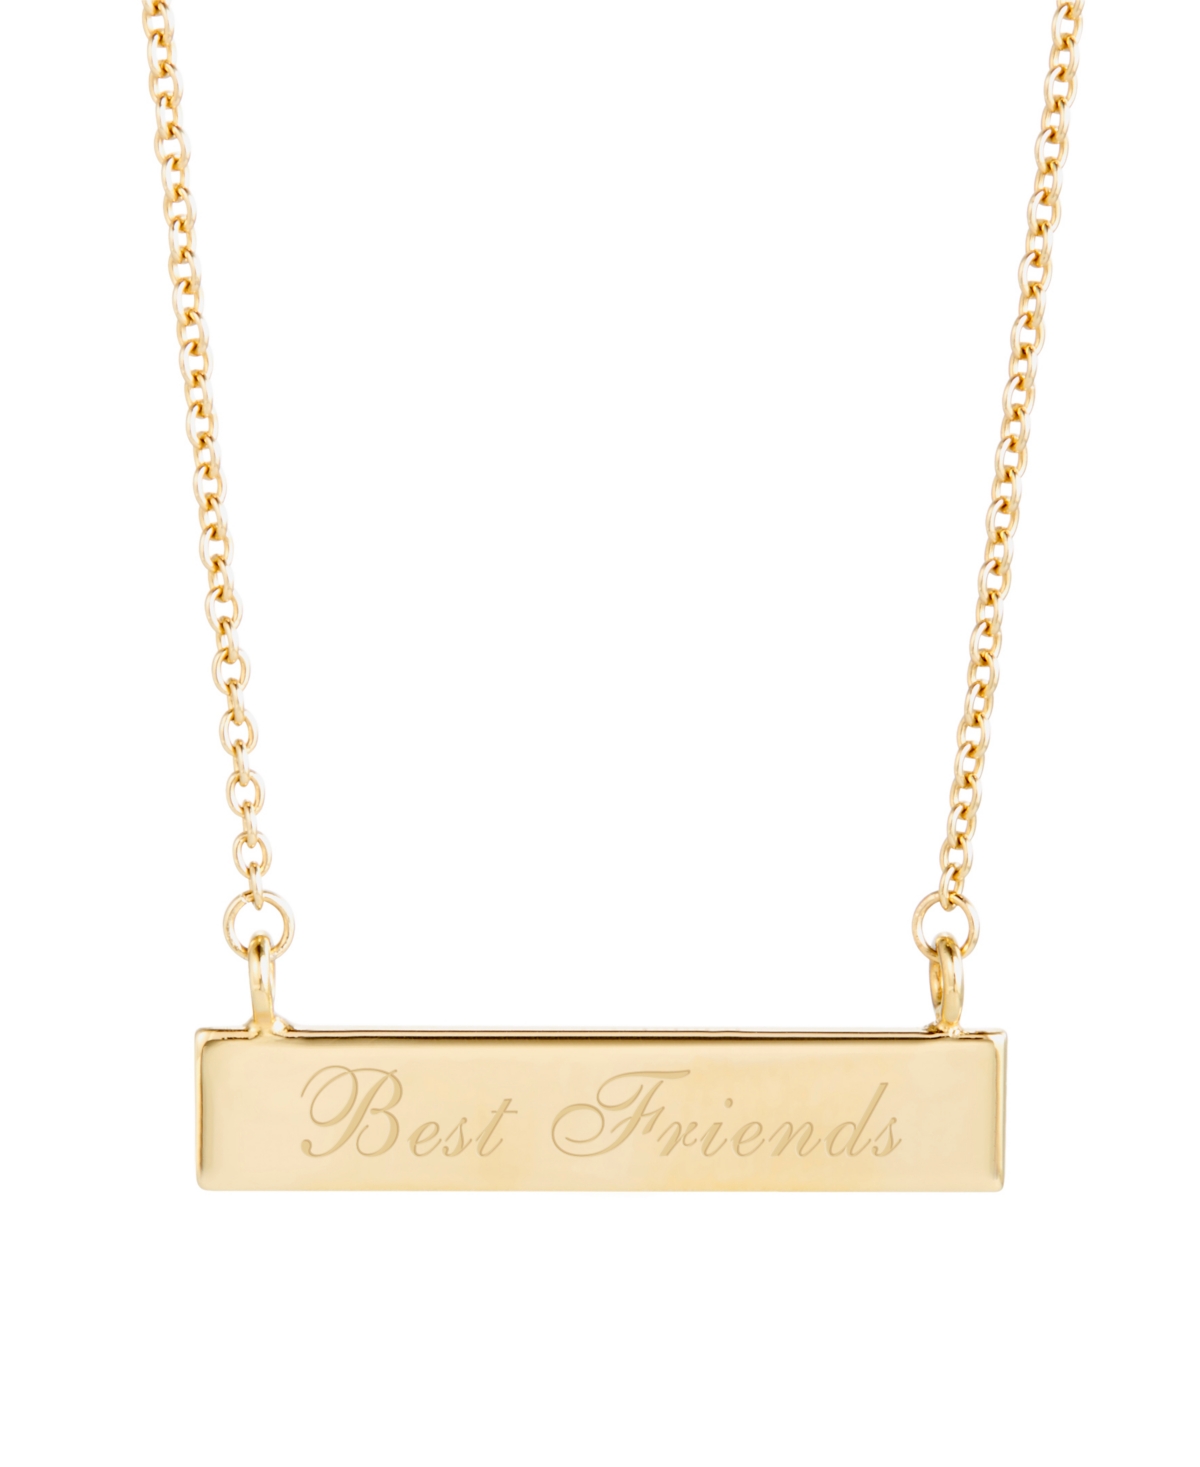 14K Gold Plated Best Friends Bar Necklace - Gold-Plated